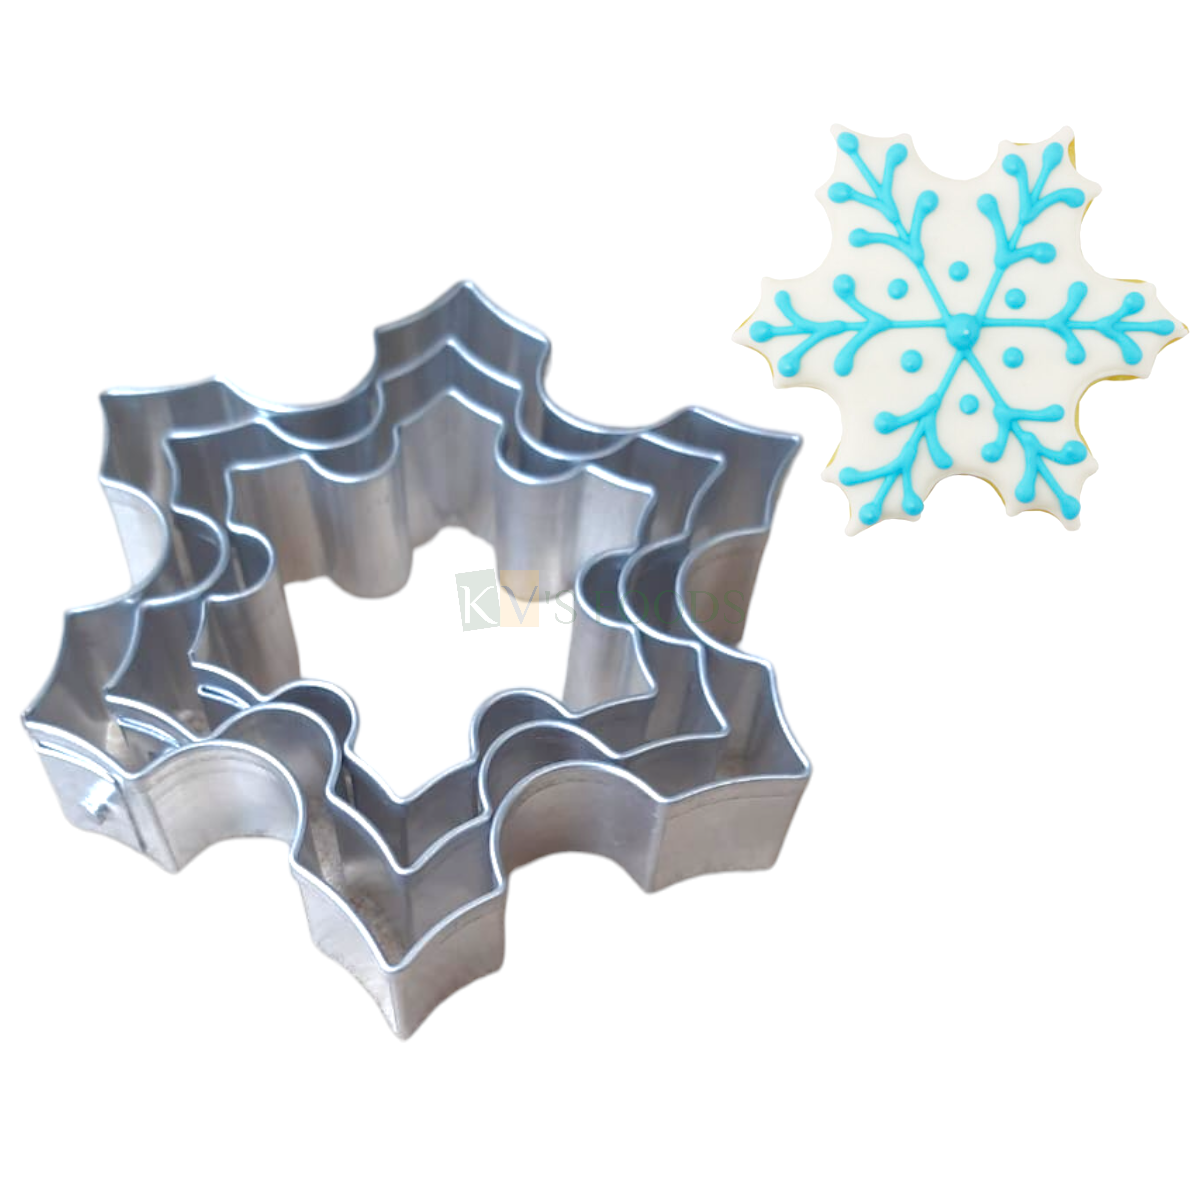 3 Pc Silver Christmas Snowflakes Shape Cookie Cutter Metal Molds Sandwitch Cutters, Can be used for Cakes Biscuits Chocolates Pancake Fondant Cheese Gingerbread Cutter Birthday Parties Decorations